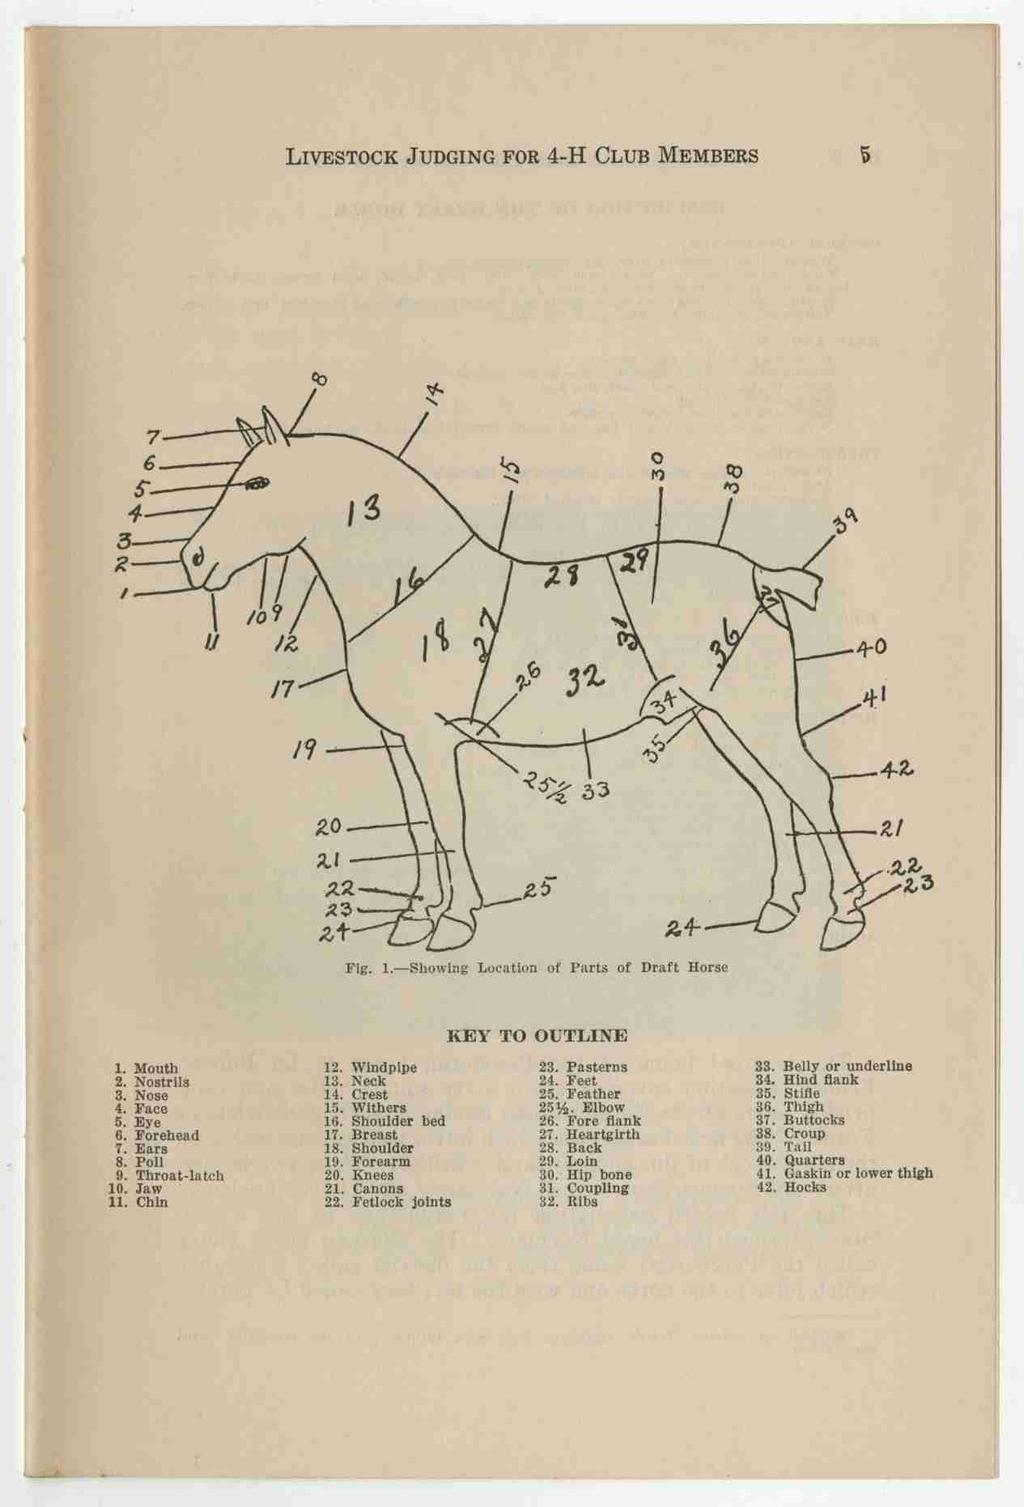 LIVESTOCK J UDGING FOR 4-H CLUB MEMBERS 2.! 2 23 Fig. 1. Showing Location of Parts of Draft Horse KEY TO OUTLINE Mouth. Windpipe 23. Pasterns Belly or underline. Nostrils 3. Neck 24.